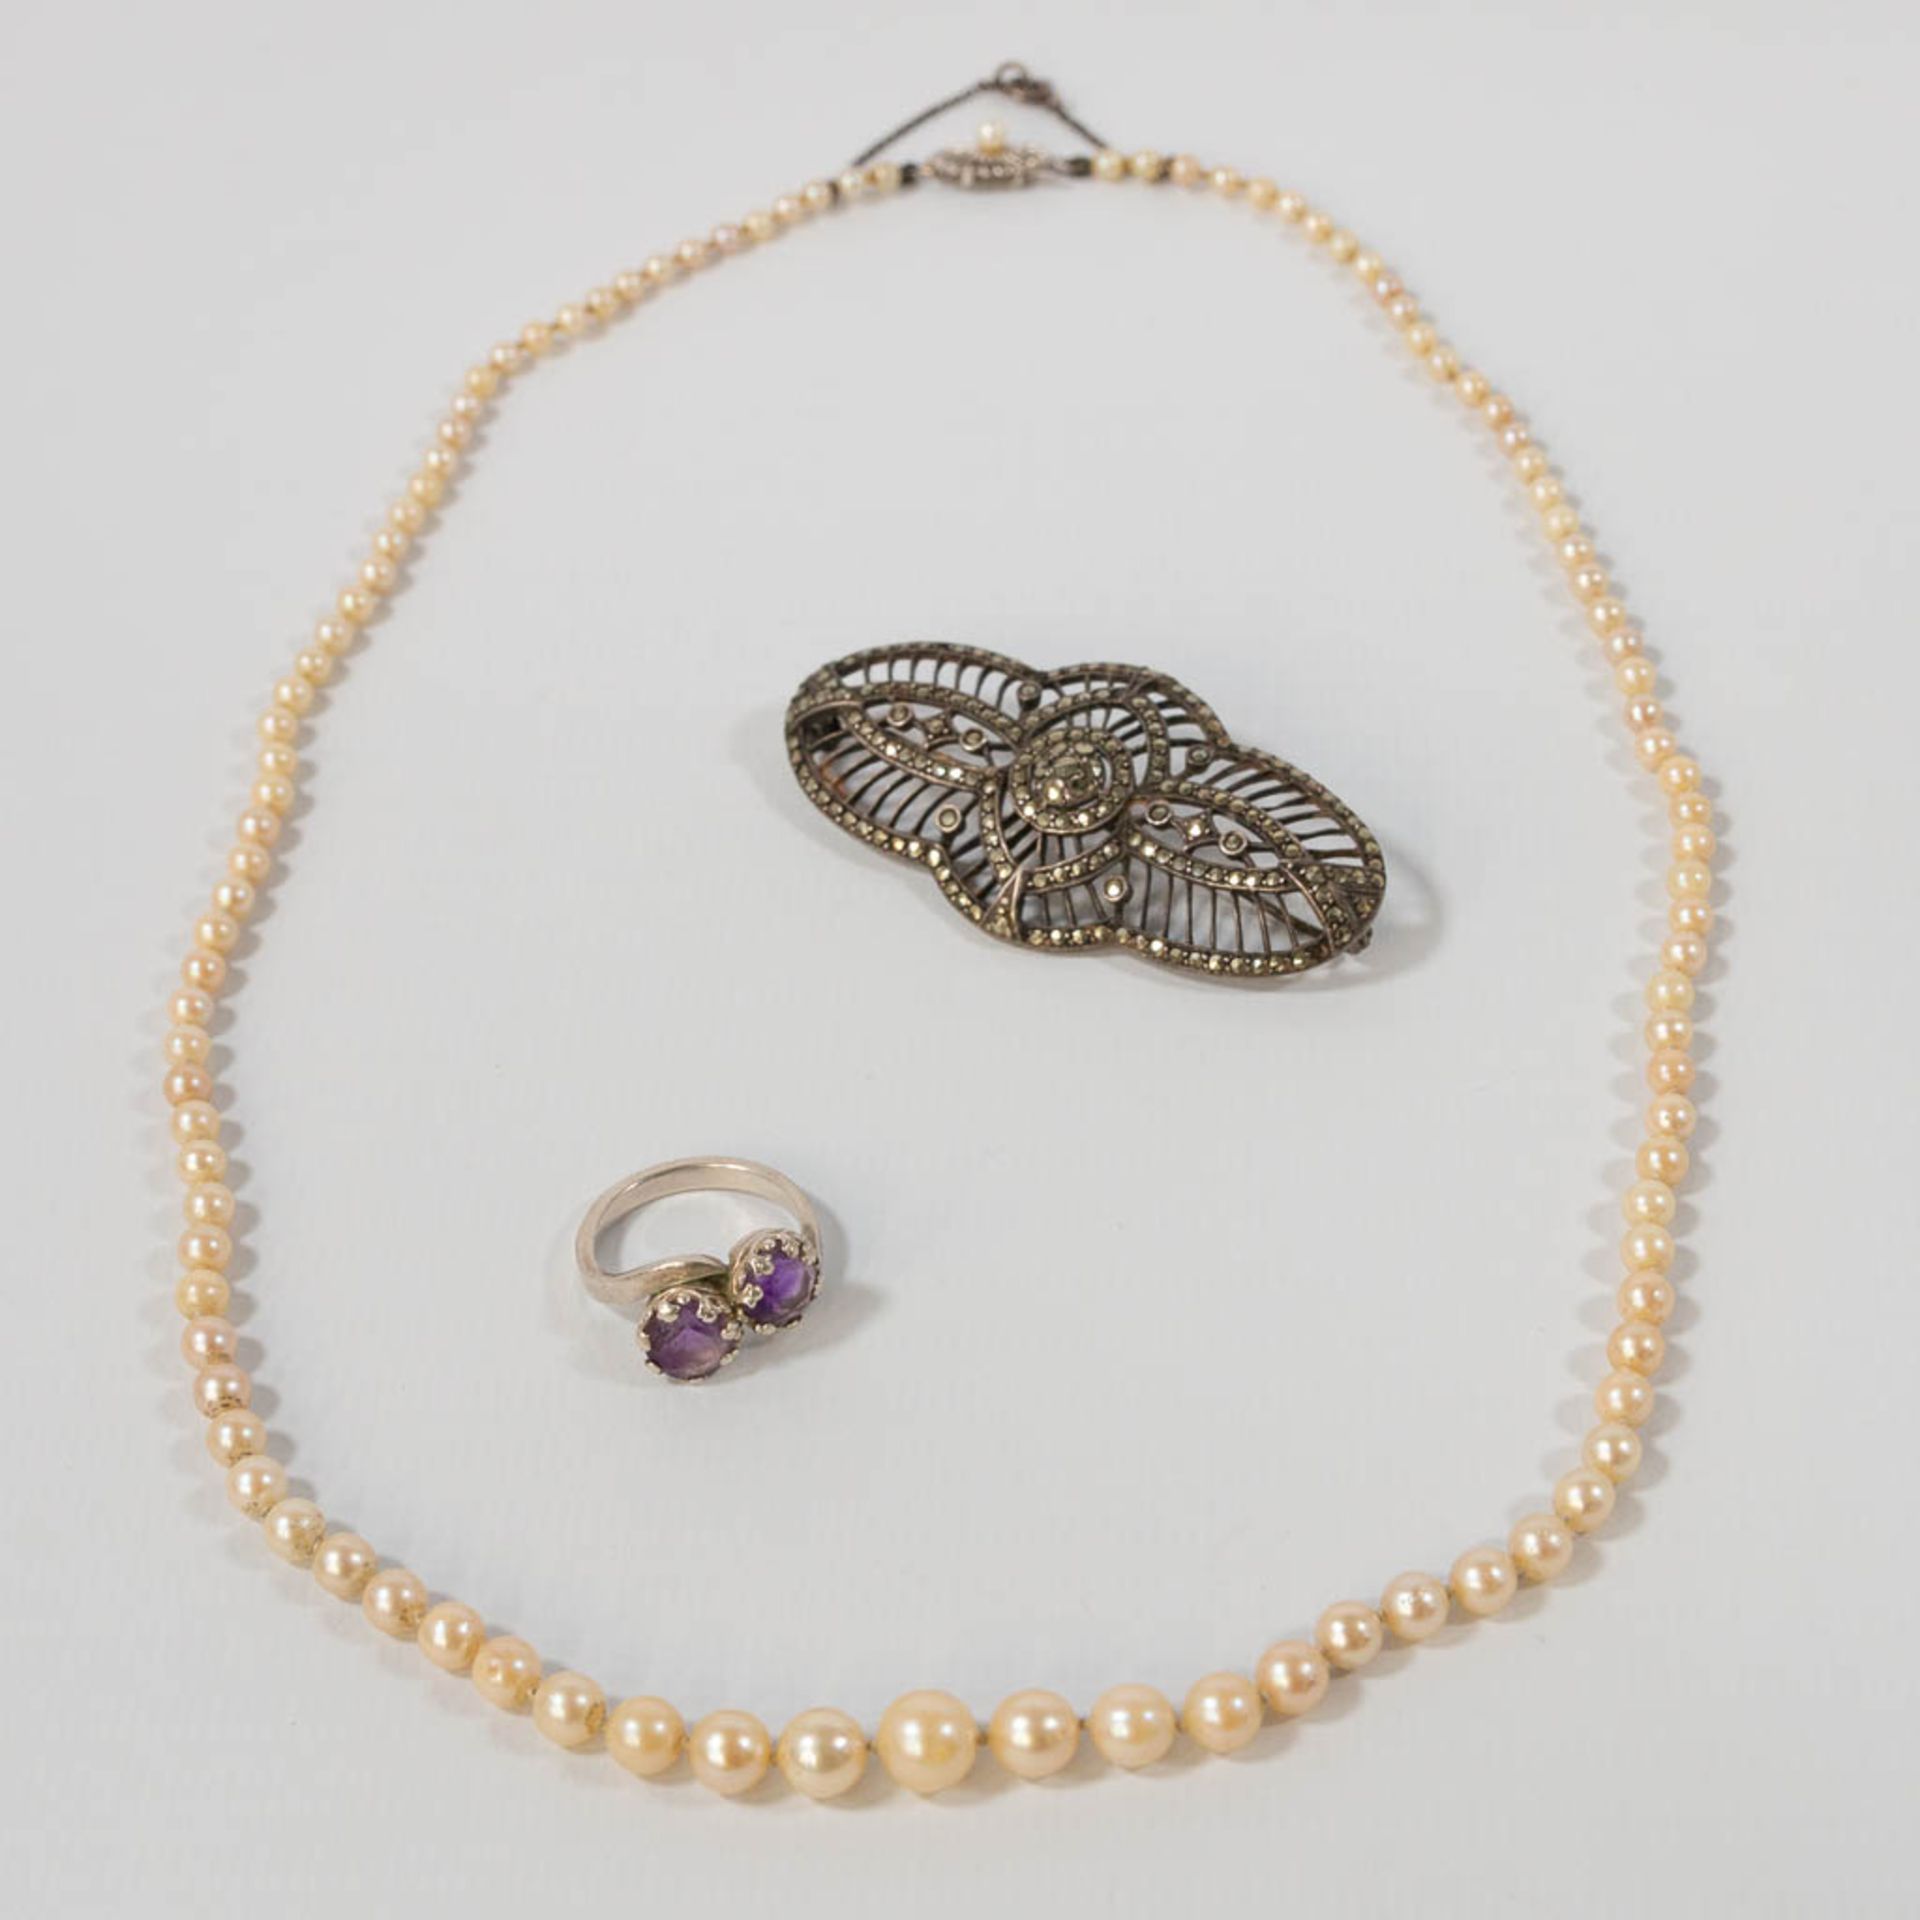 A pearl necklace with 18 karat white gold buckle, combined with a silver ring with purple stones and - Bild 2 aus 15